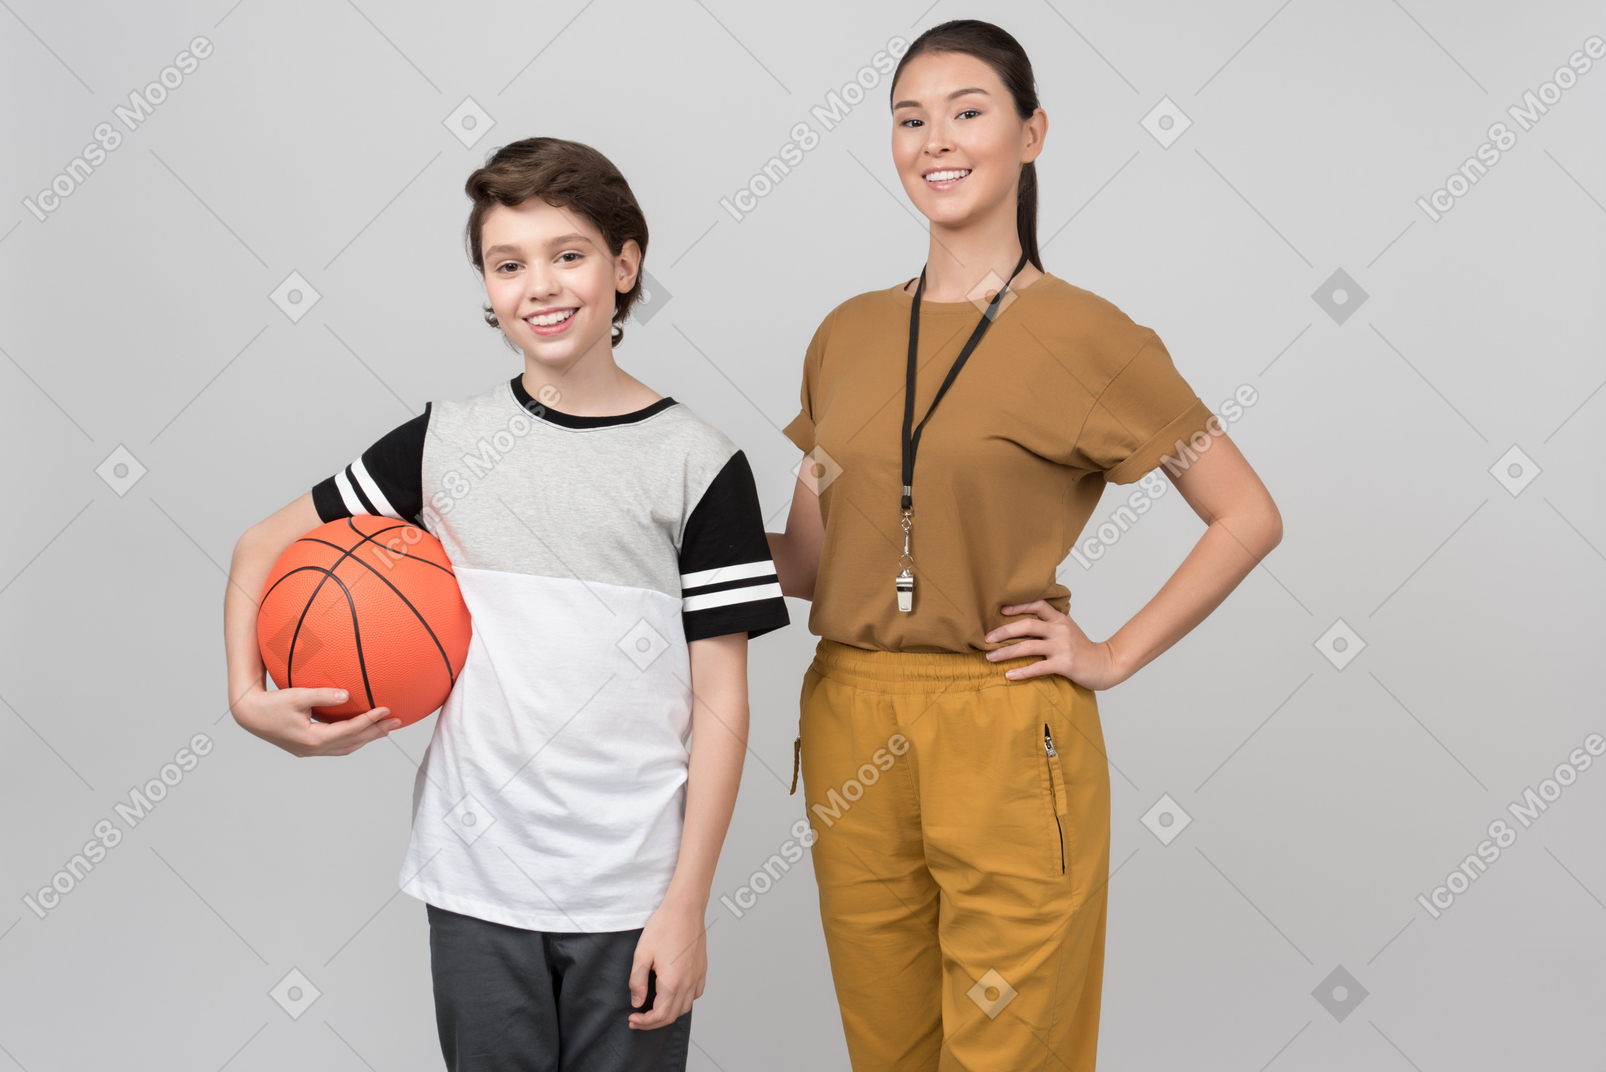 Smiling physical education teacher and pupil